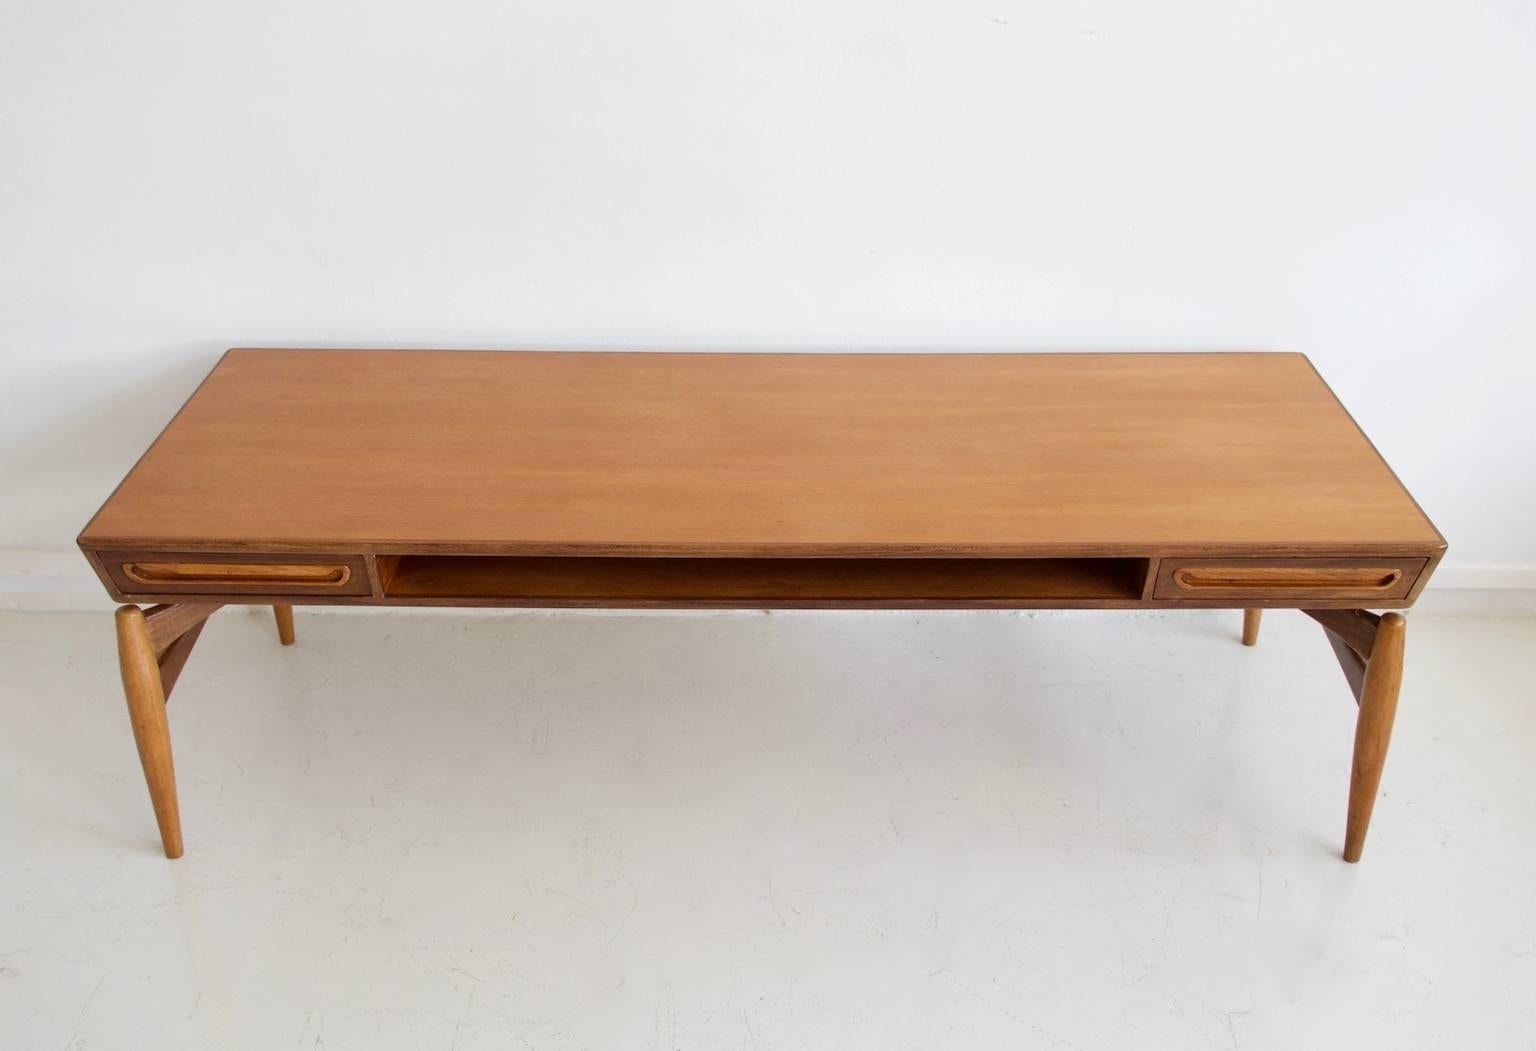 Johannes Andersen teak coffee table for Trensum; tabletop built on a sculpted stand, made of teak, mahogany and walnut woods and produced by Trensum during the 1960s. Two drawers with carved pulls that can be opened from both sides of the table and